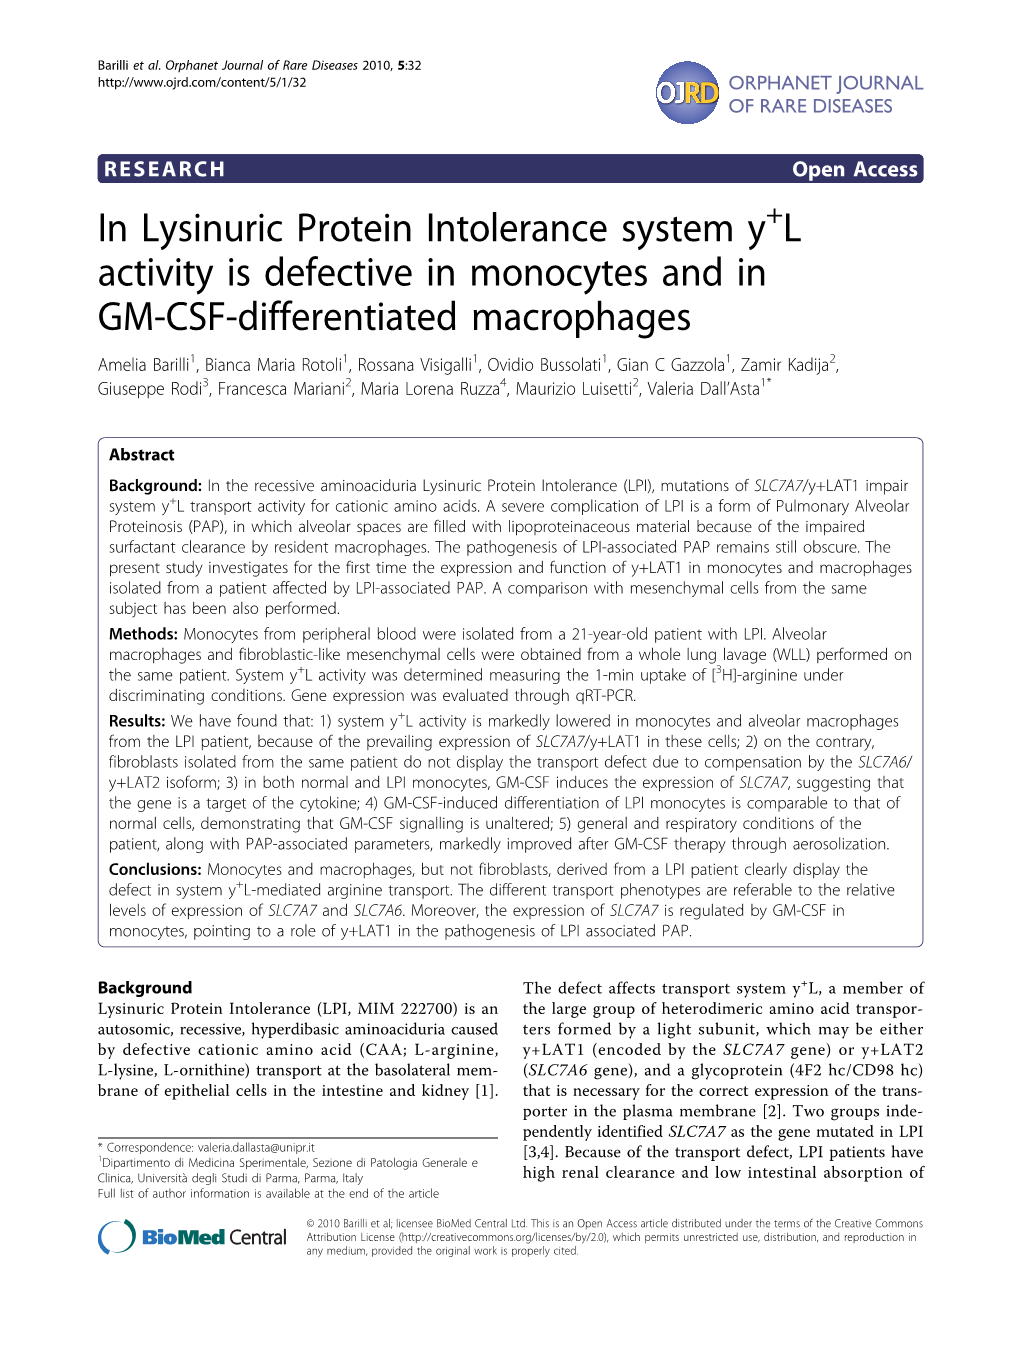 In Lysinuric Protein Intolerance System Y L Activity Is Defective In